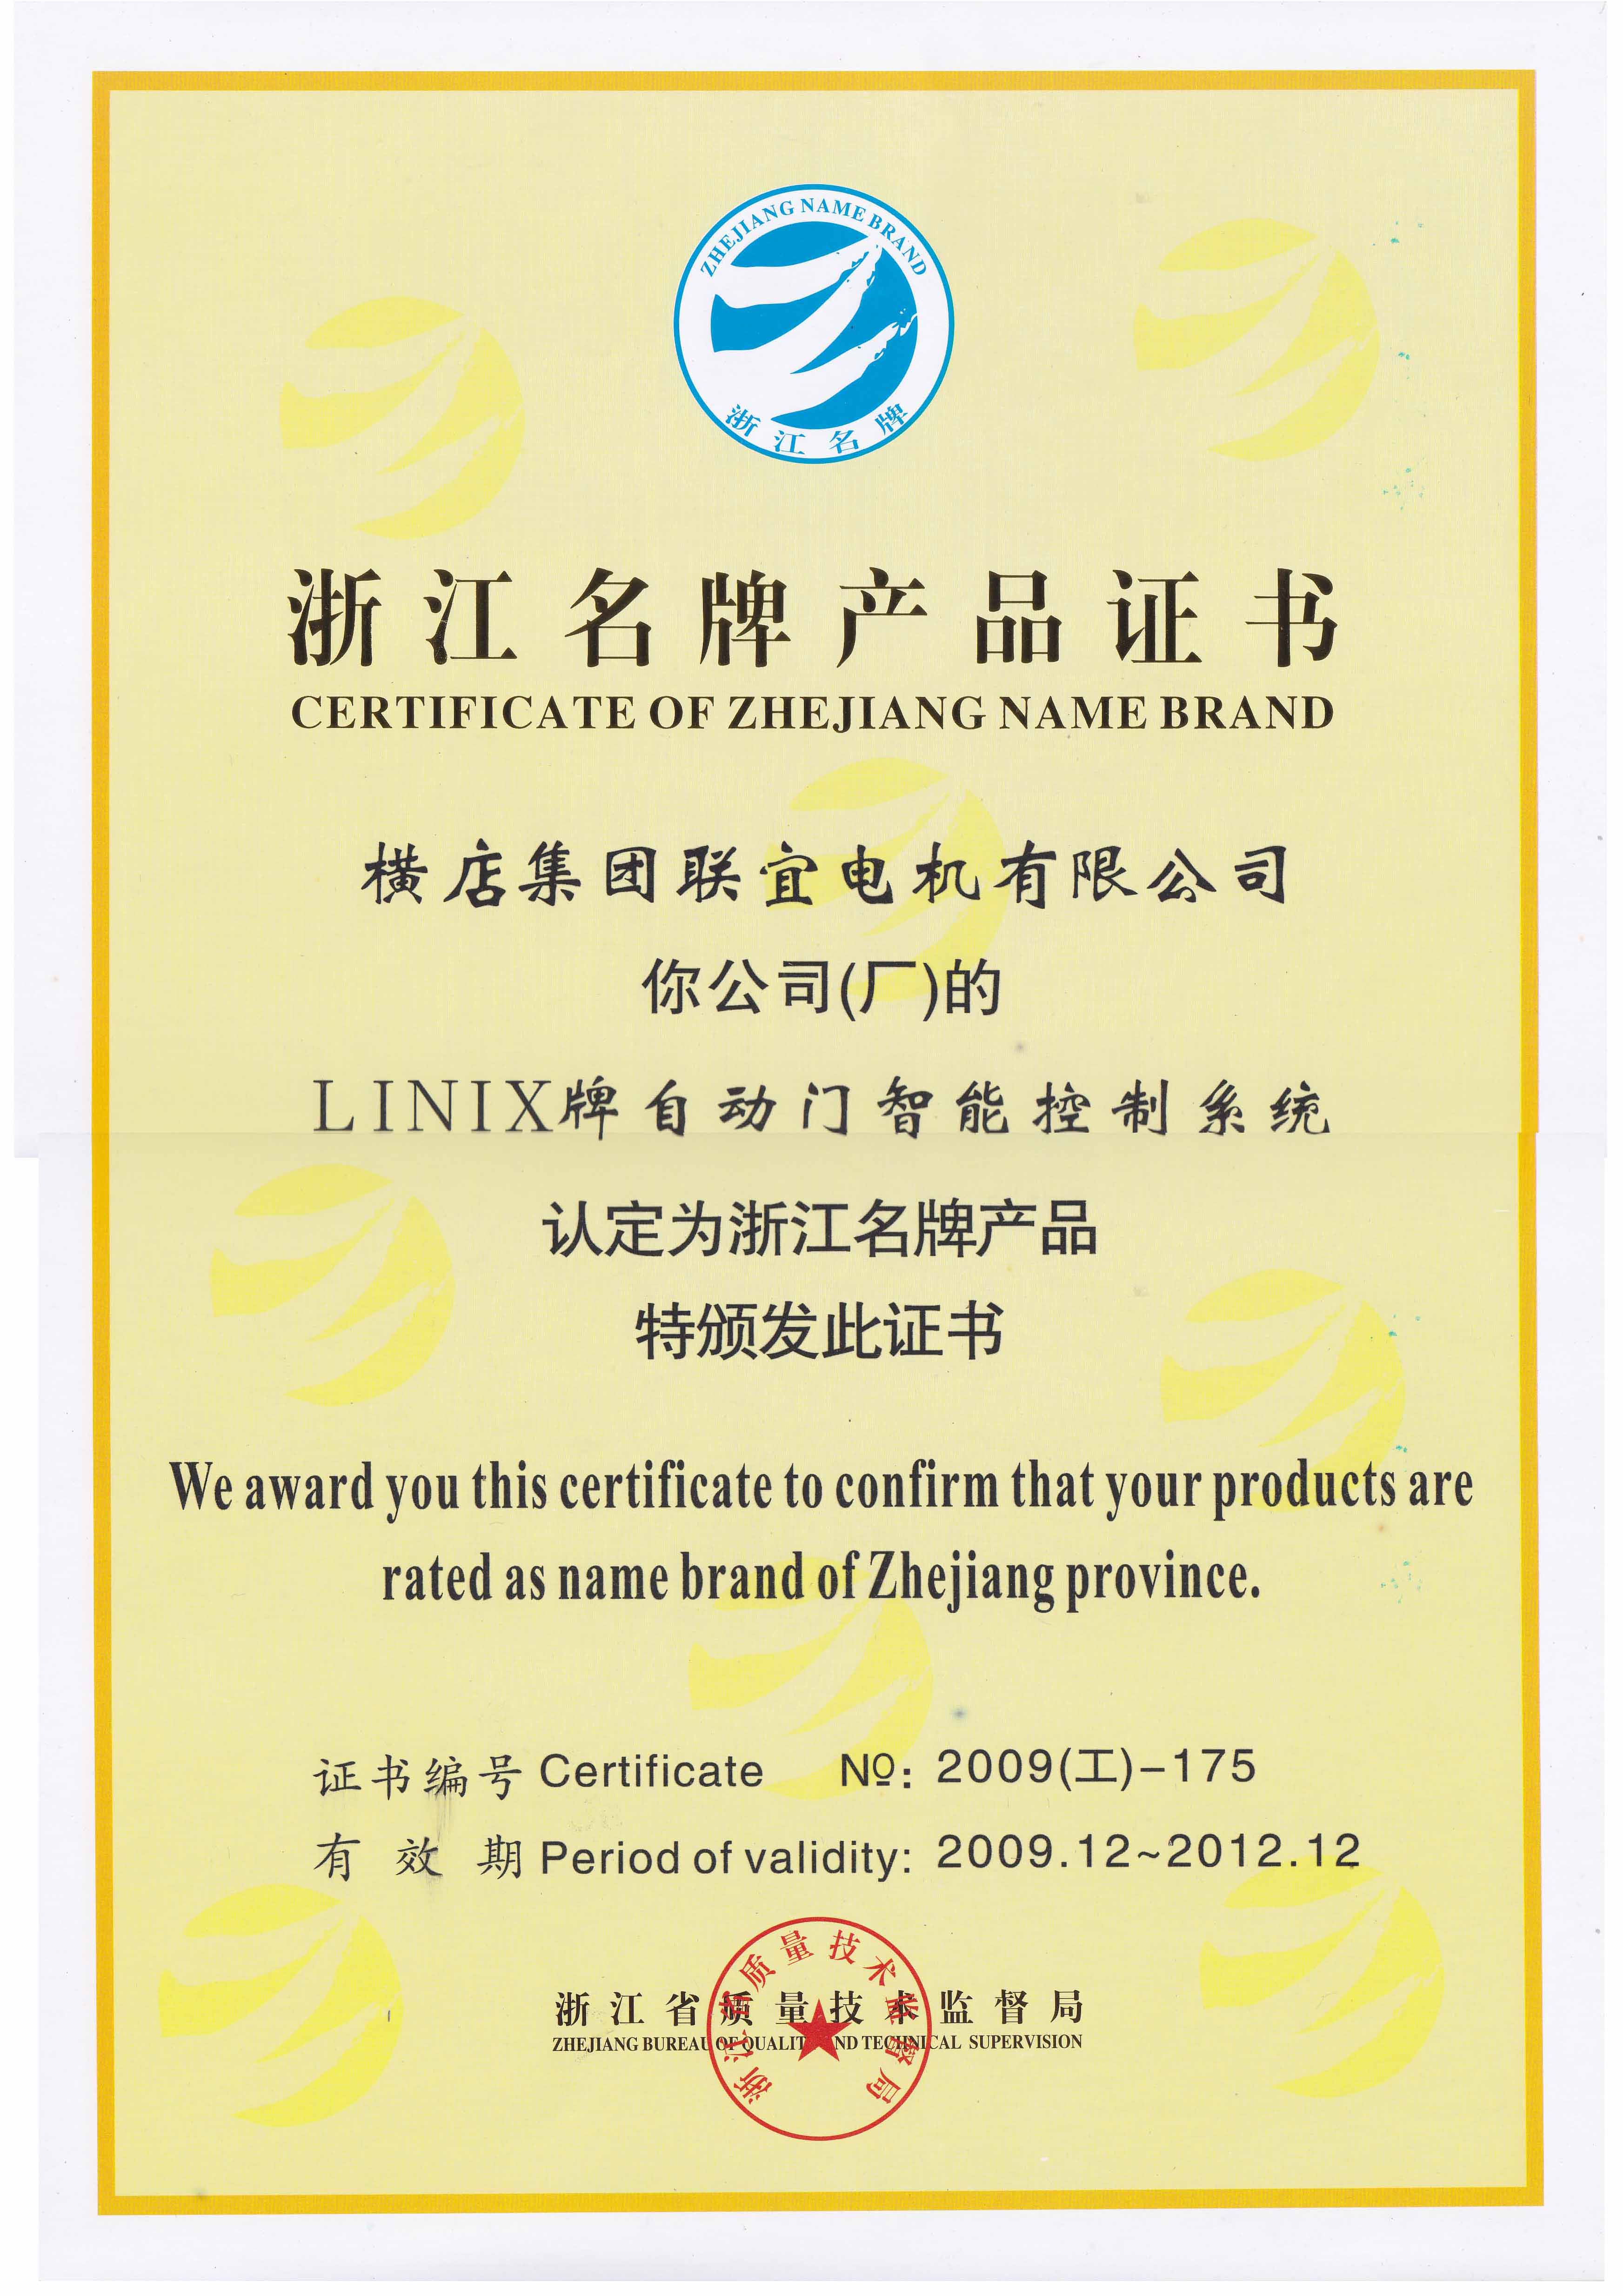 Zhejiang famous brand product certificate - linix automatic door intelligent control system